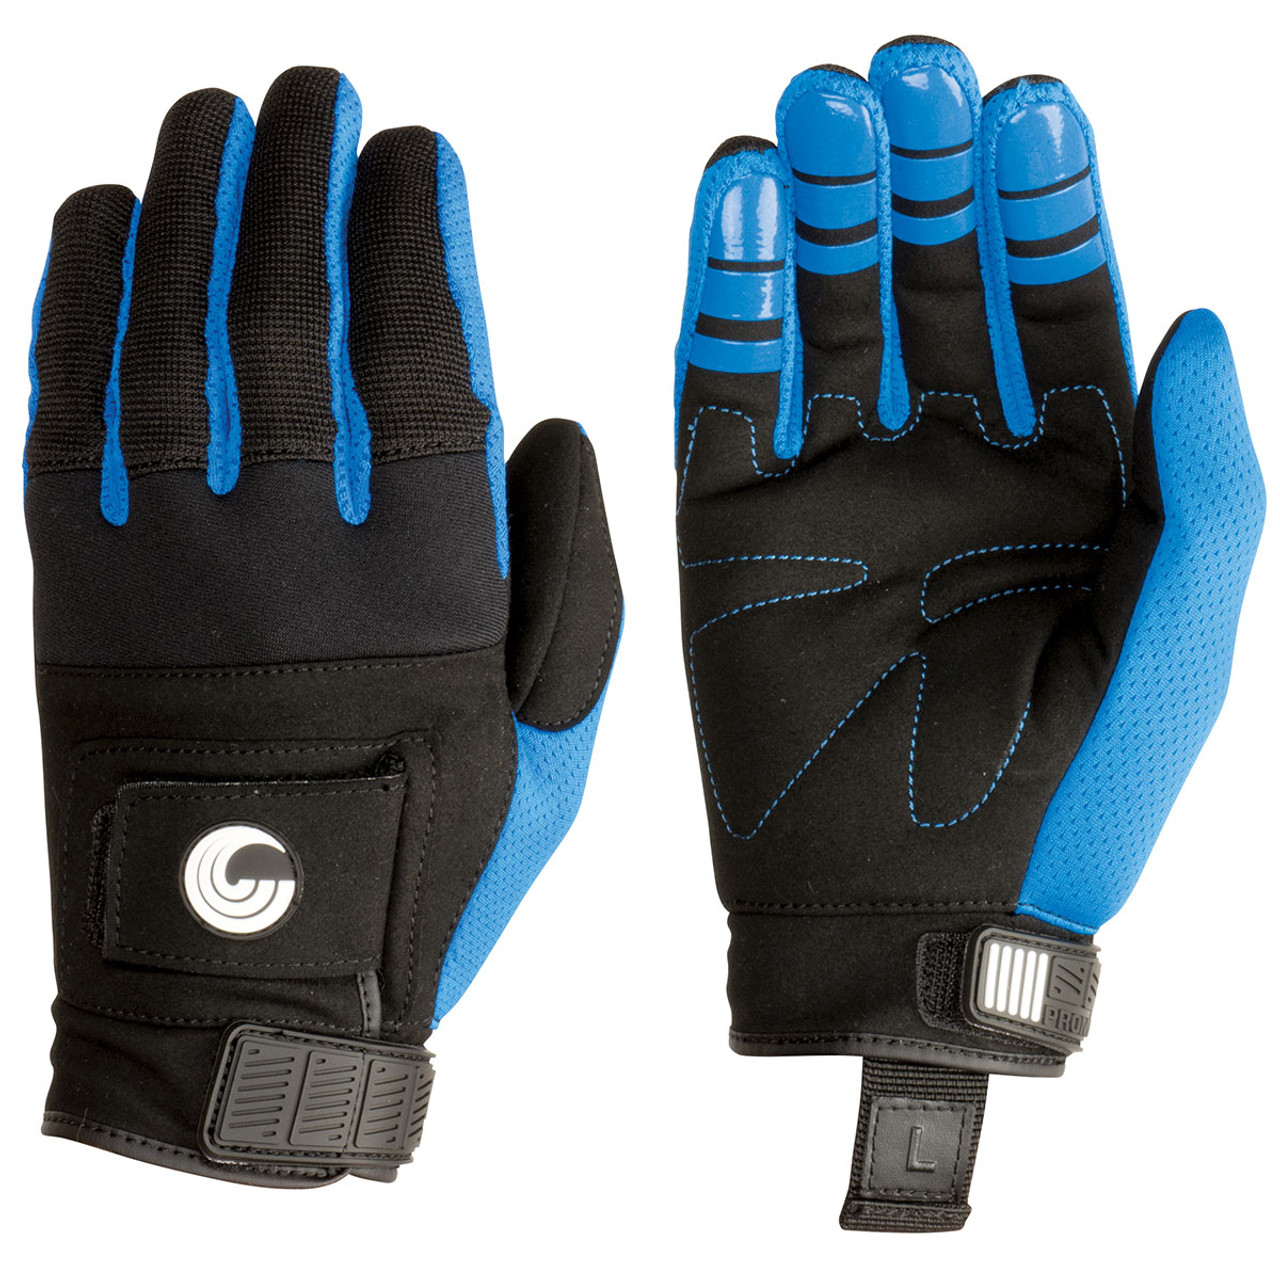 Connelly Promo Water Ski Gloves - Women's